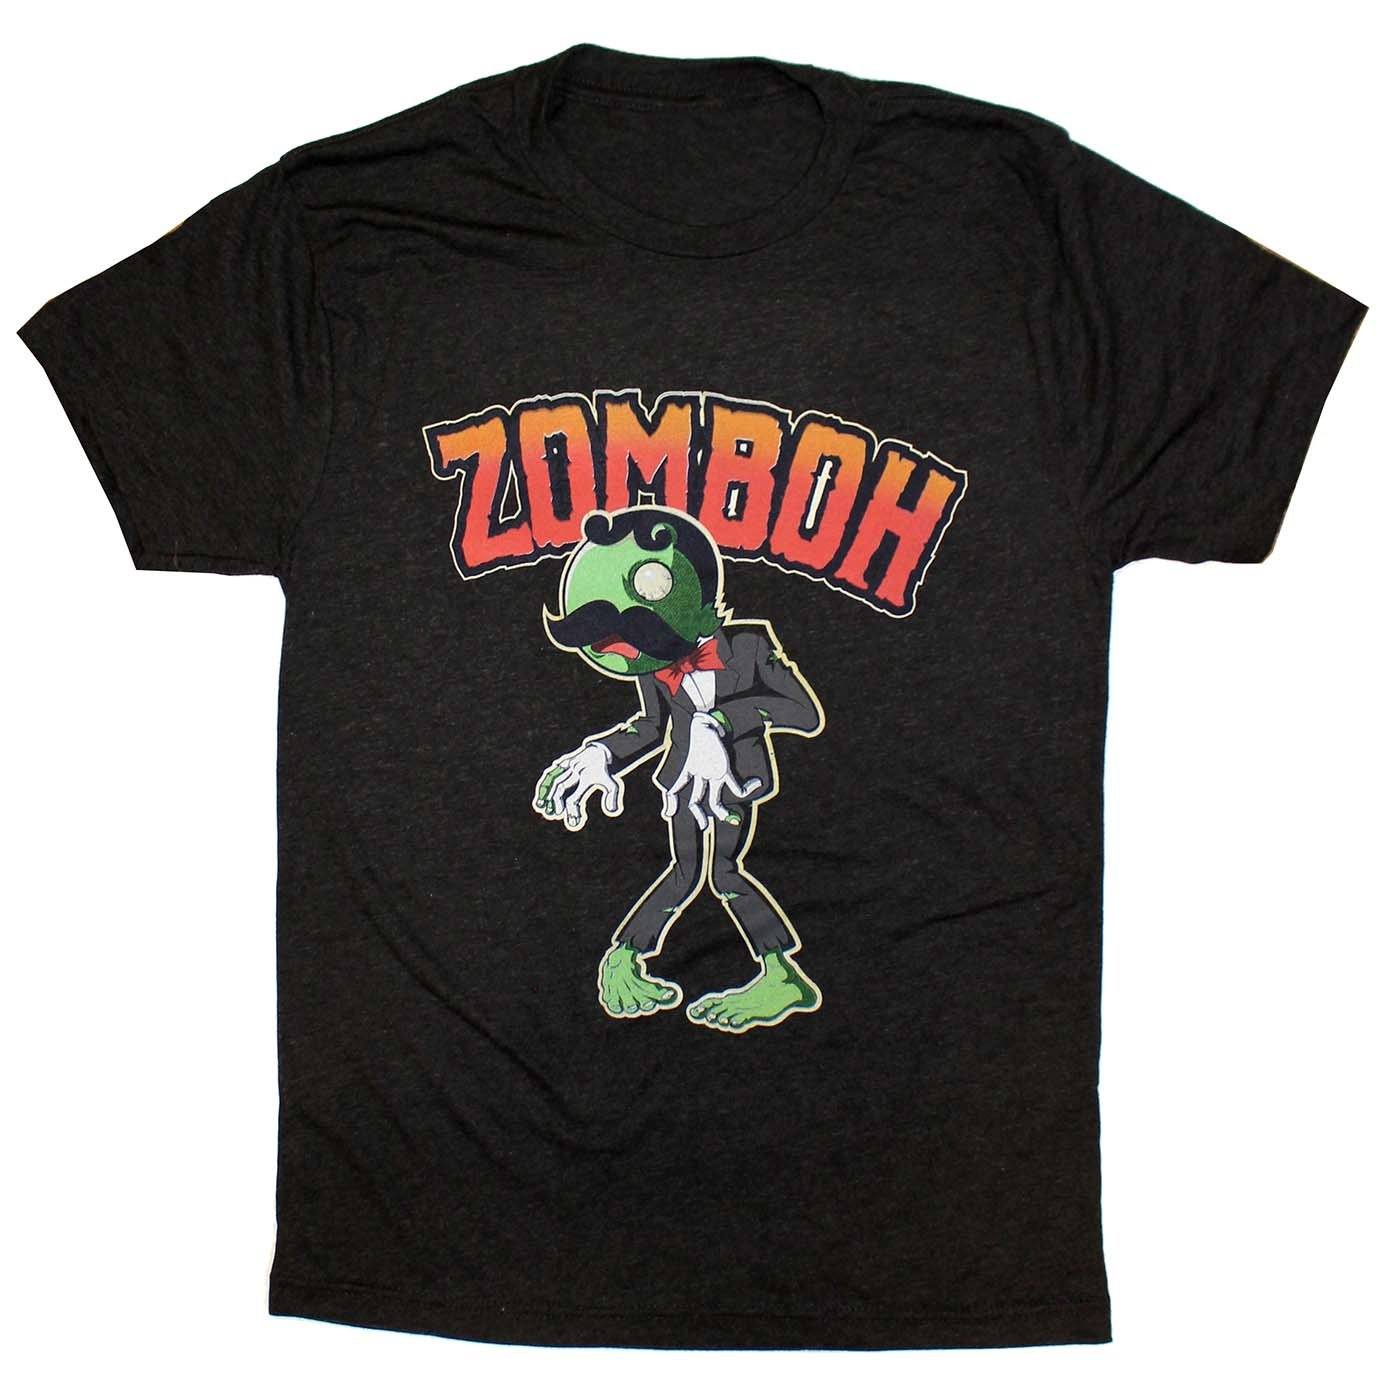 Zomboh (Black) / Shirt - Route One Apparel